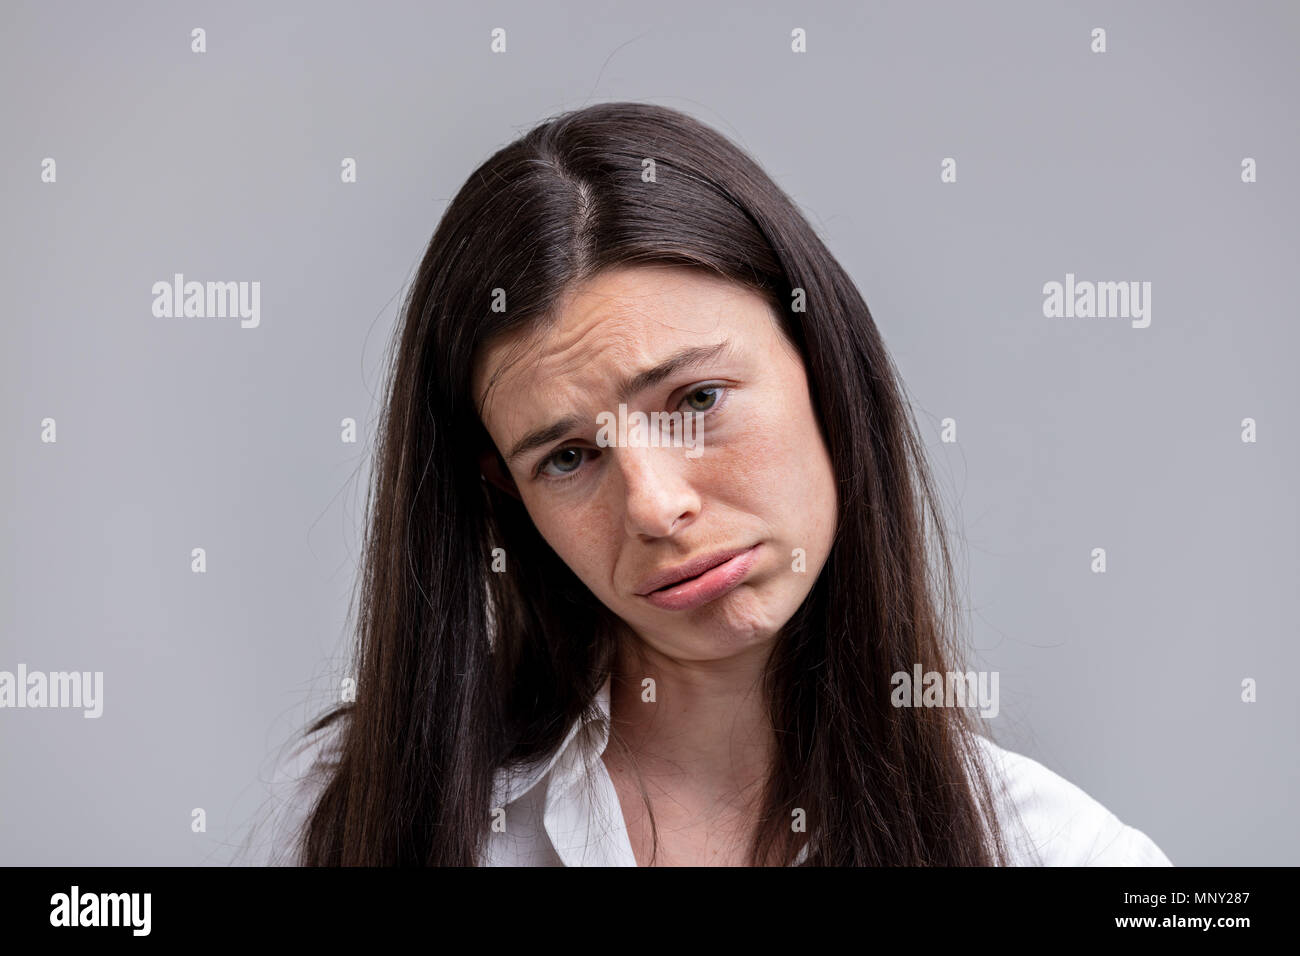 Portrait of young long-haired miserable brunette woman Stock Photo